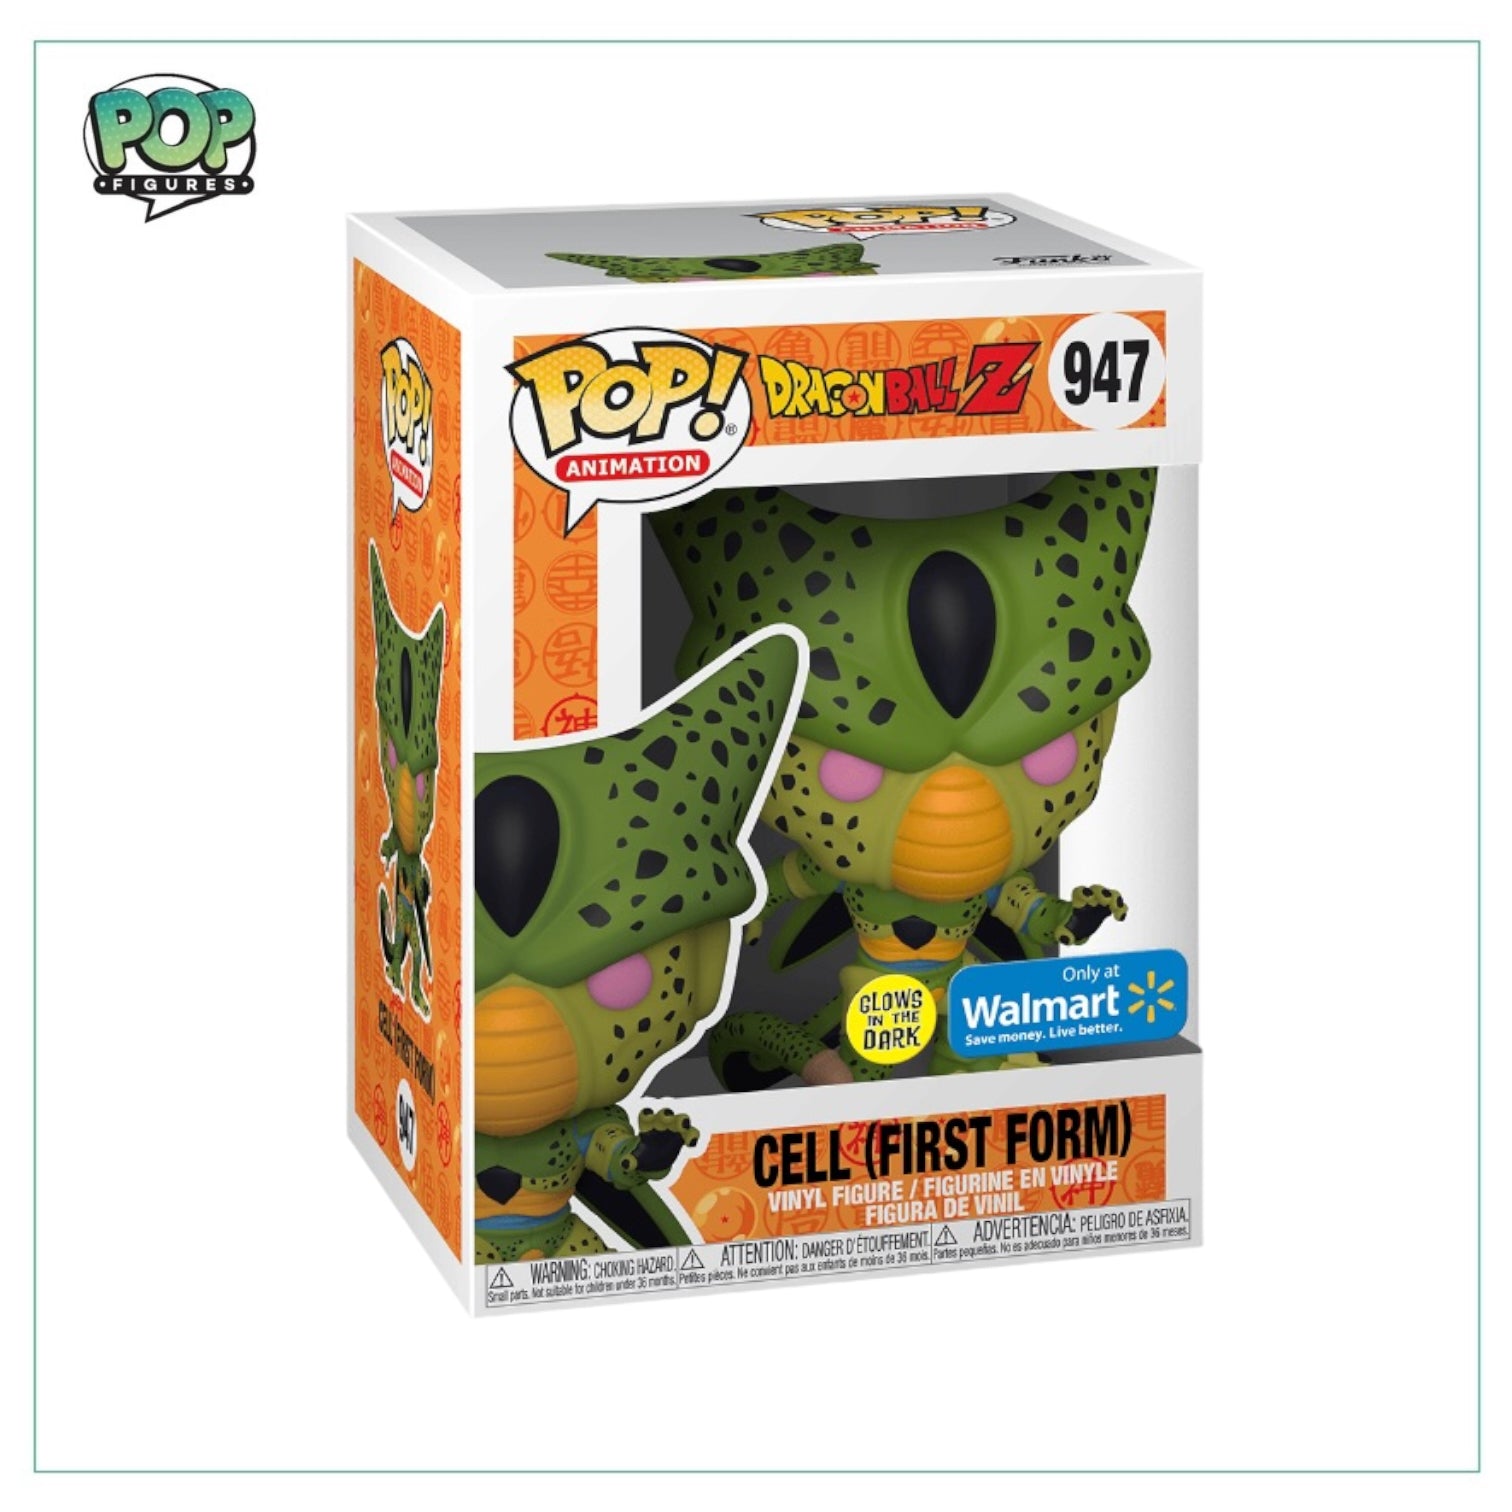 Cell (First Form) (Glow In The Dark) #947 Funko Pop! - Dragon Ball Z - Walmart Exclusive